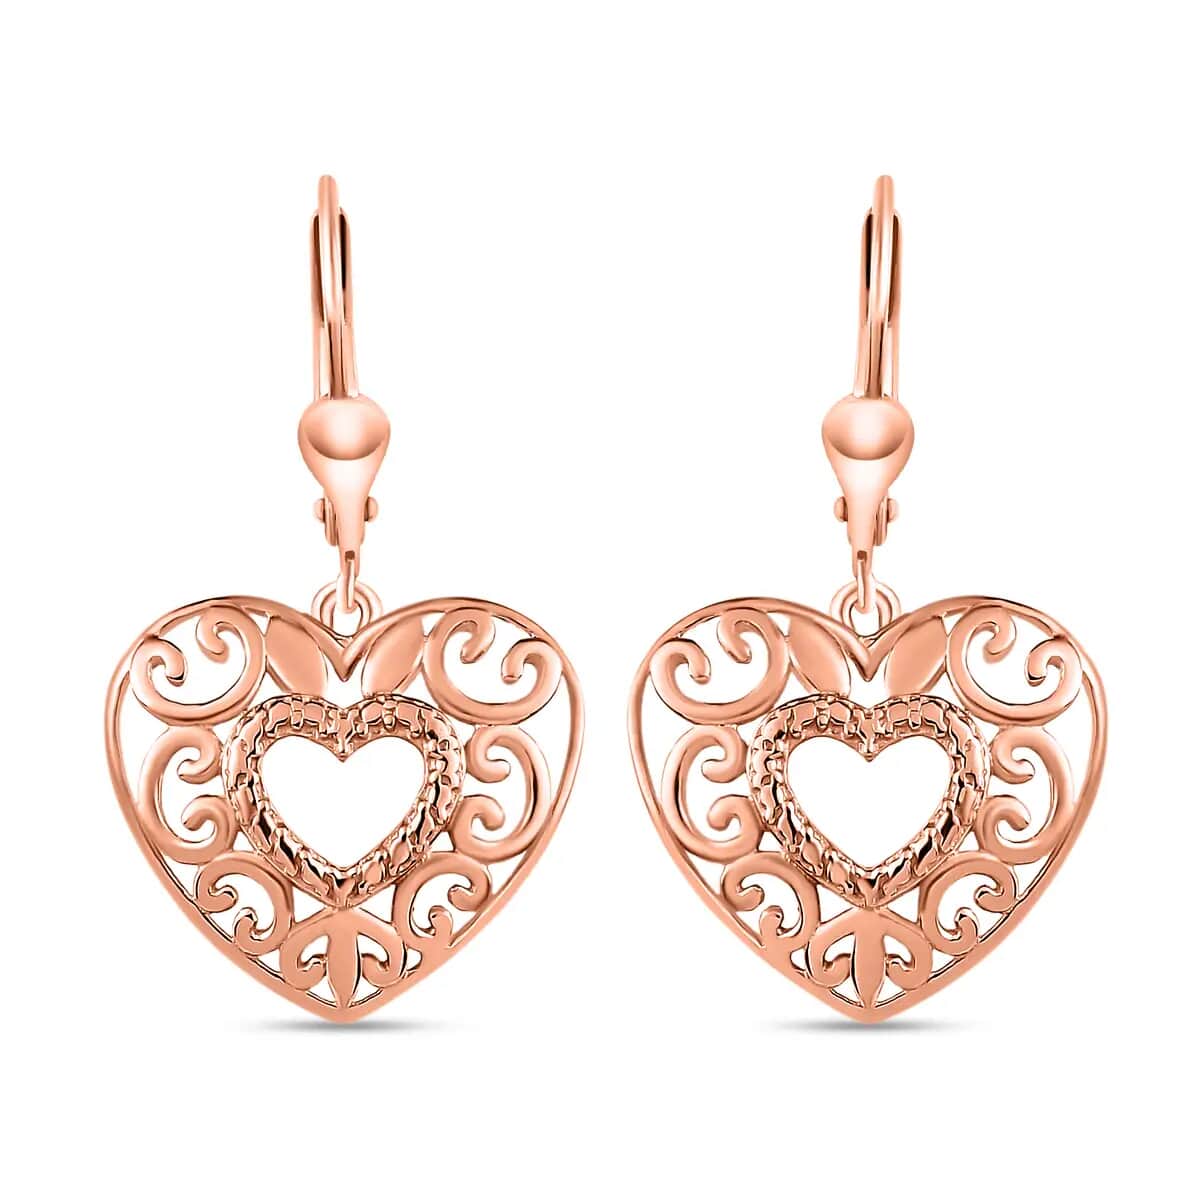 Mother’s Day Gift Openwork Earrings, Filigree Earrings, Lever Back Earrings, Drop Earrings, 14K Rose Gold Plated Sterling Silver Earrings, Heart Earrings For Women, Jewelry Gifts For Birthday image number 0